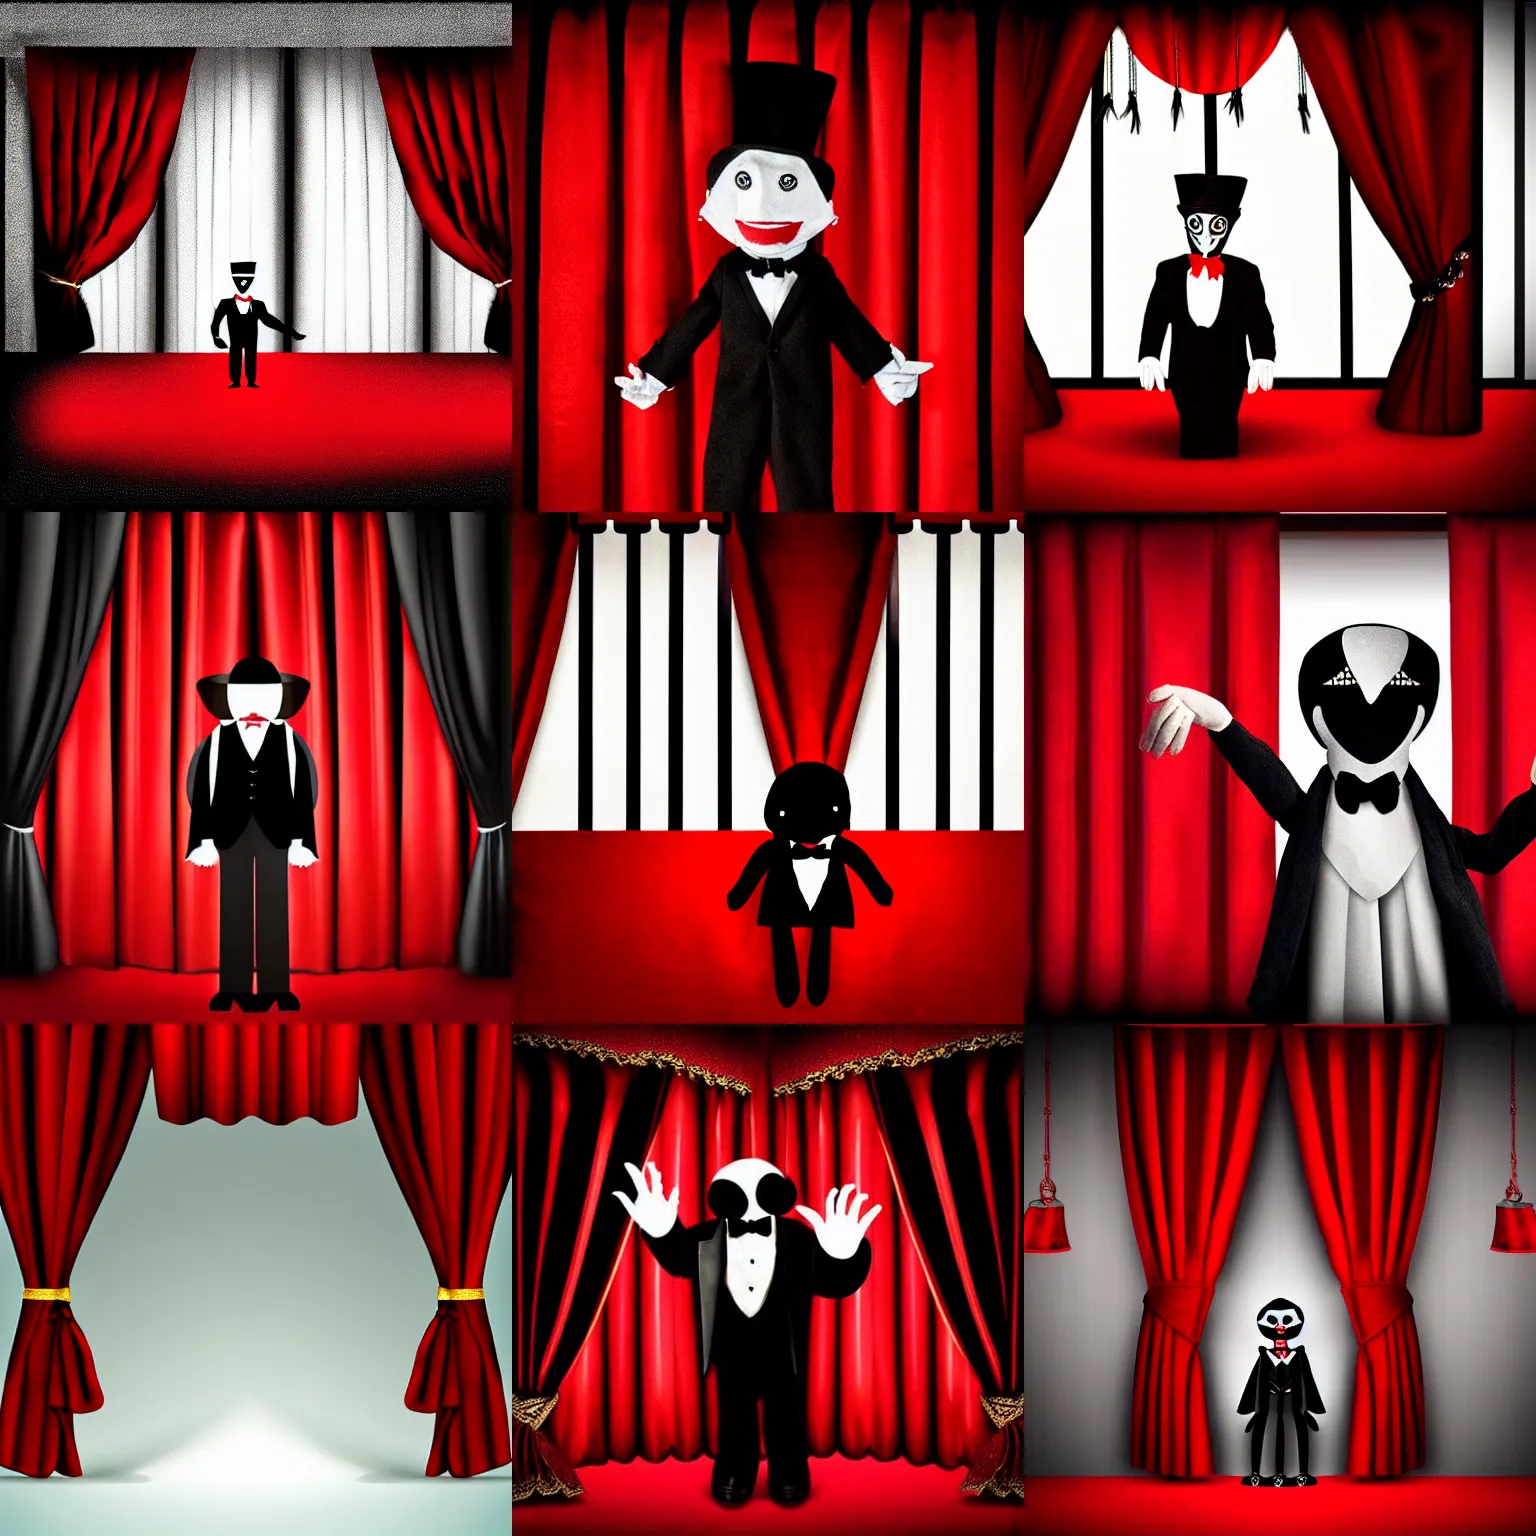 Prompt: puppet master in tuxedo behind red curtains, hand puppet strings, dark ambiance, realism